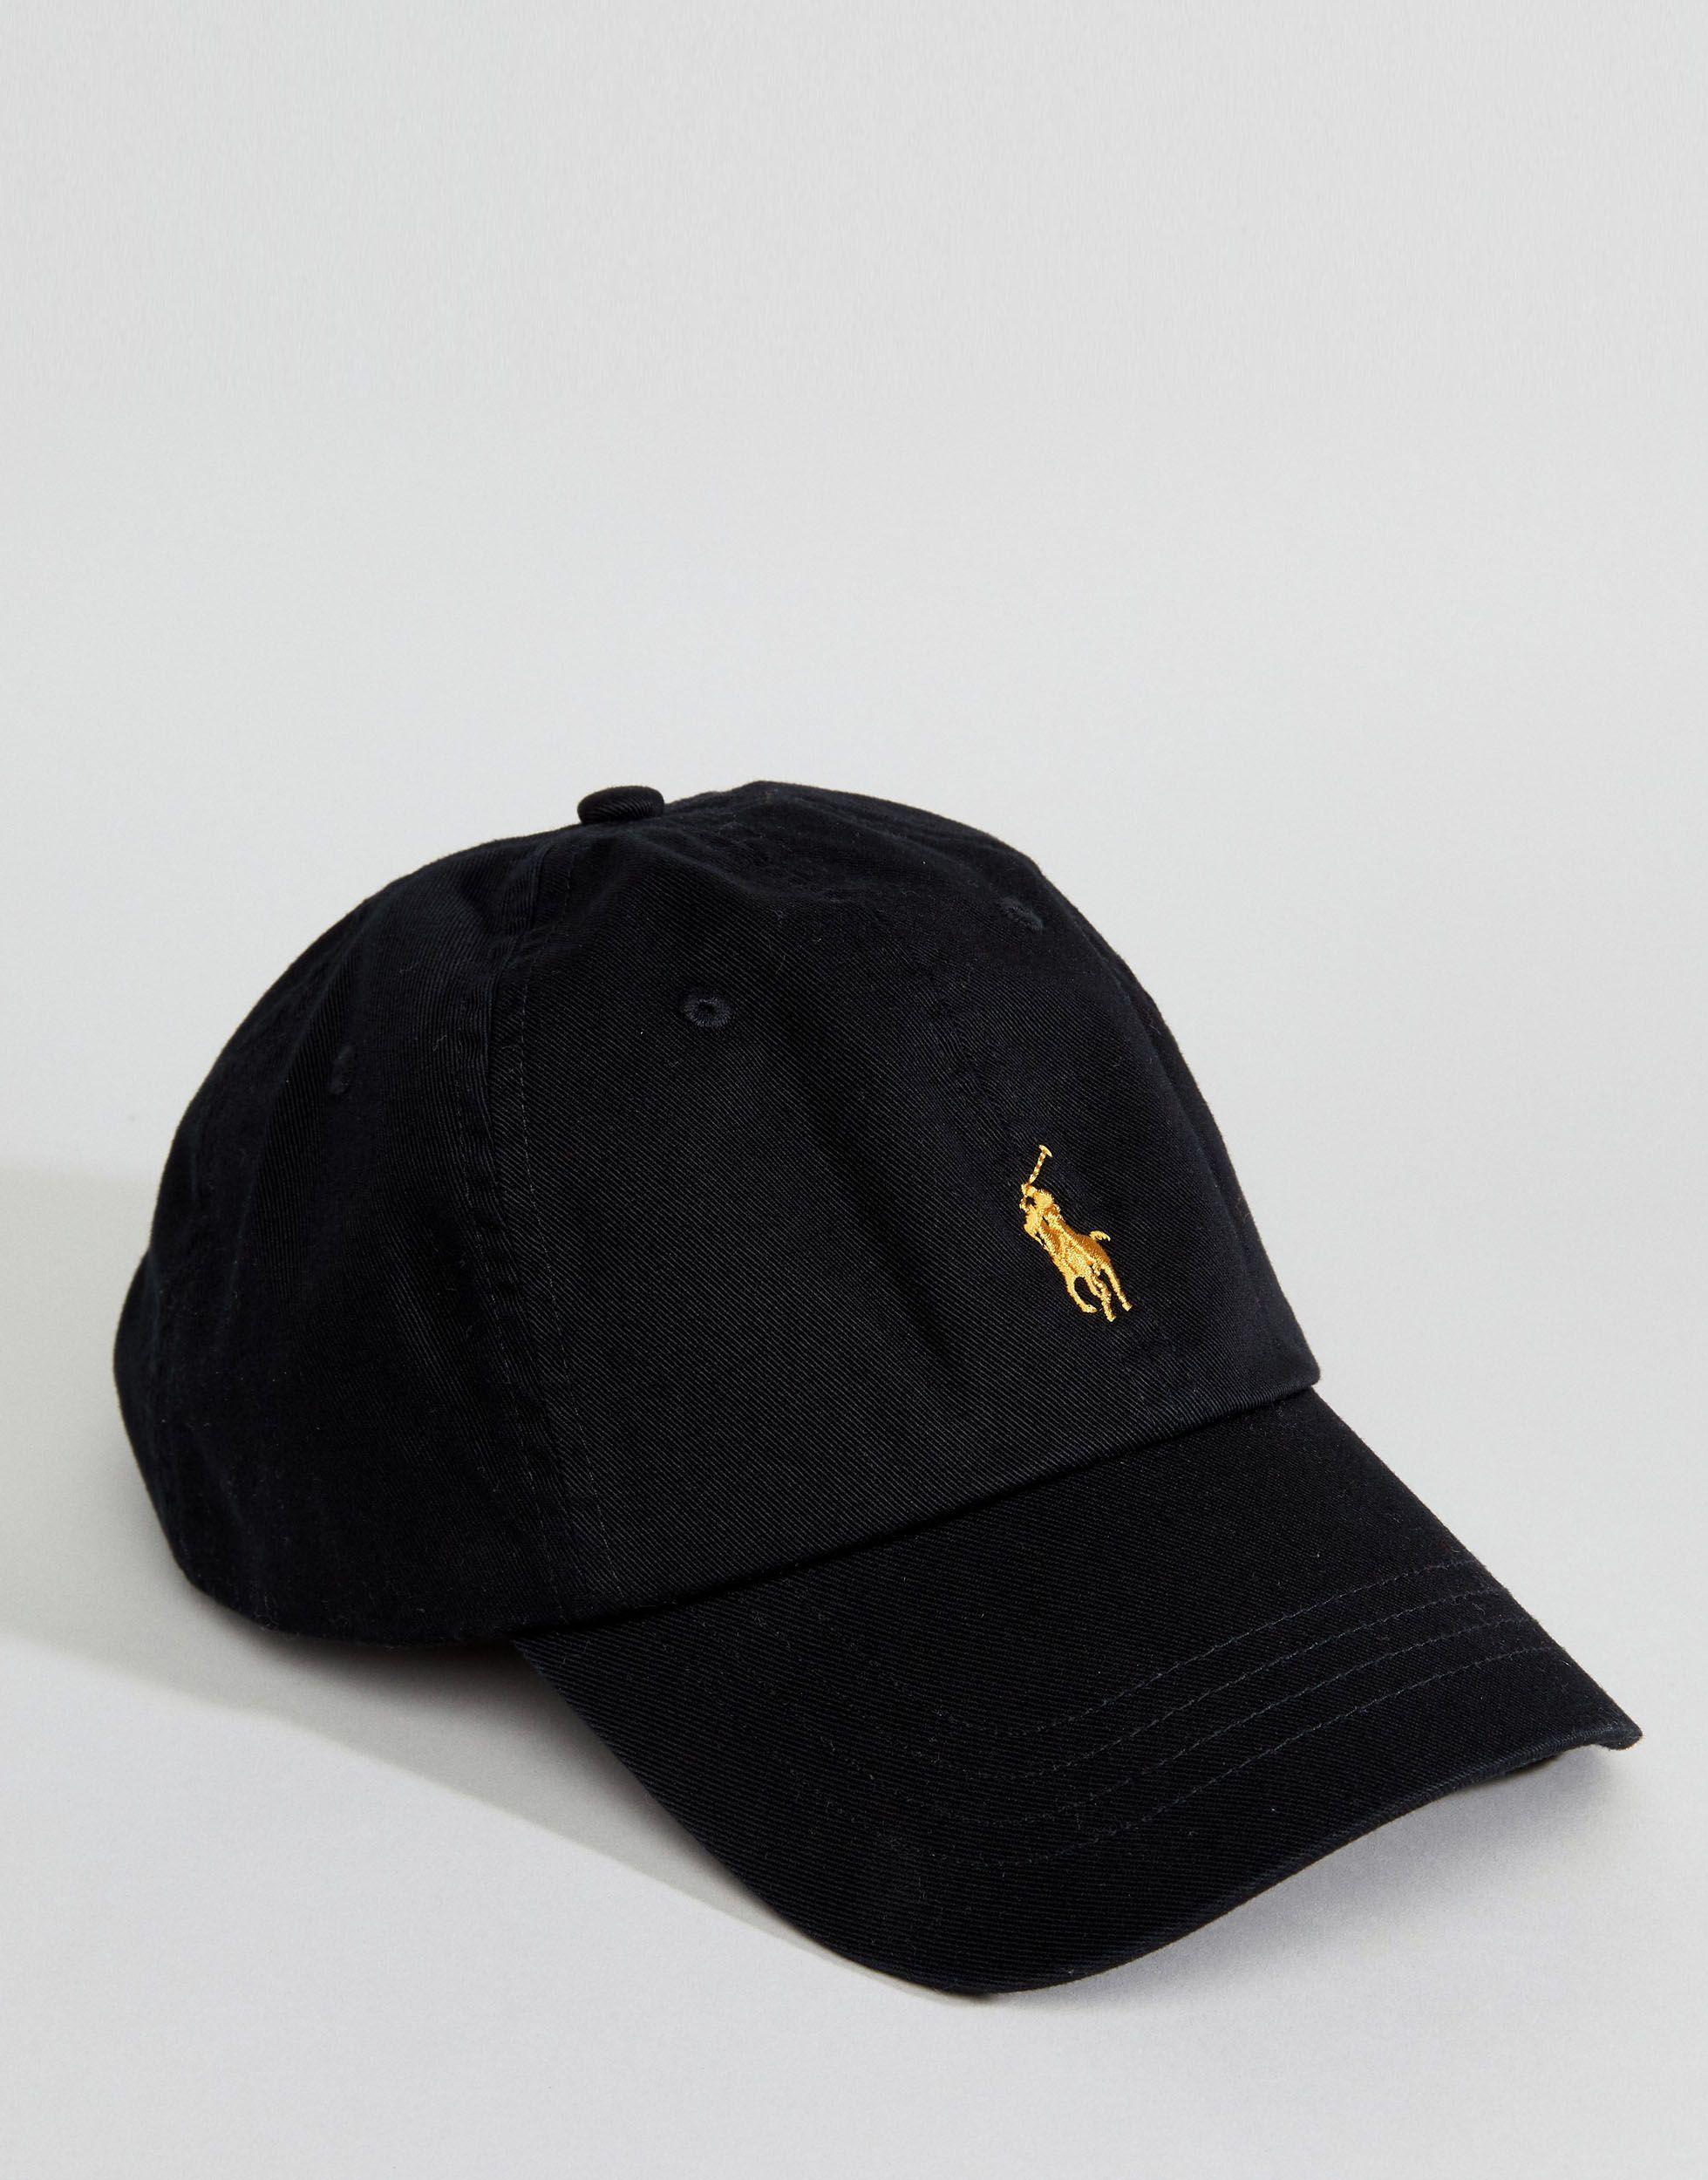 Polo Ralph Lauren Cotton Baseball Cap With Gold Player Logo in Black/Yellow  (Black) for Men - Lyst